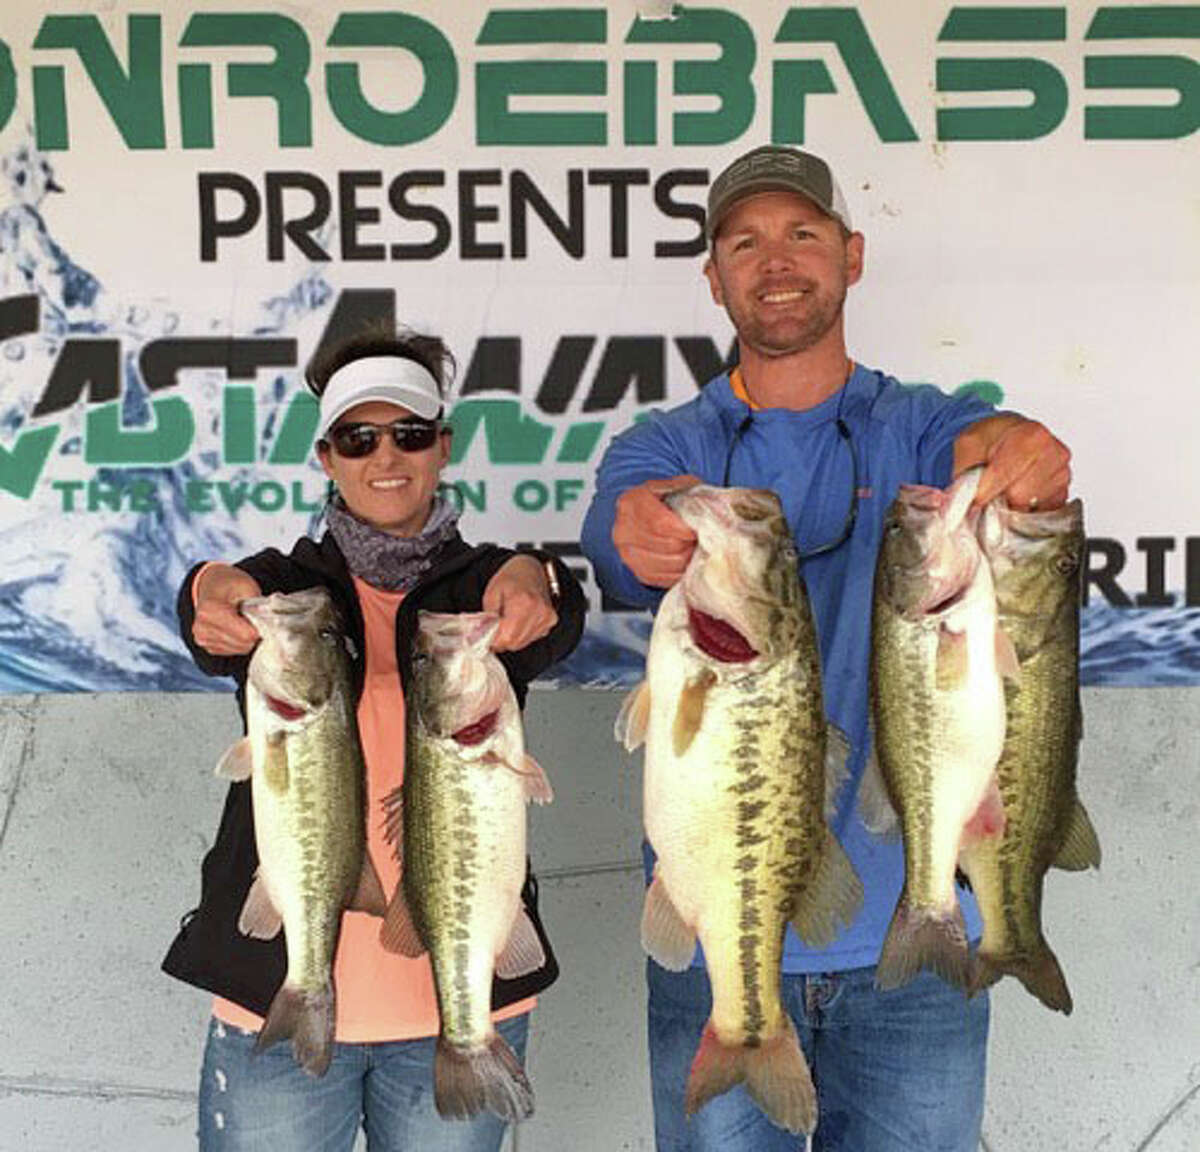 Jason and Christi Slot came in second place CONROEBASS/CASTAWAY RODS Weekend Series with a stringer total weight of 20.13 pounds.